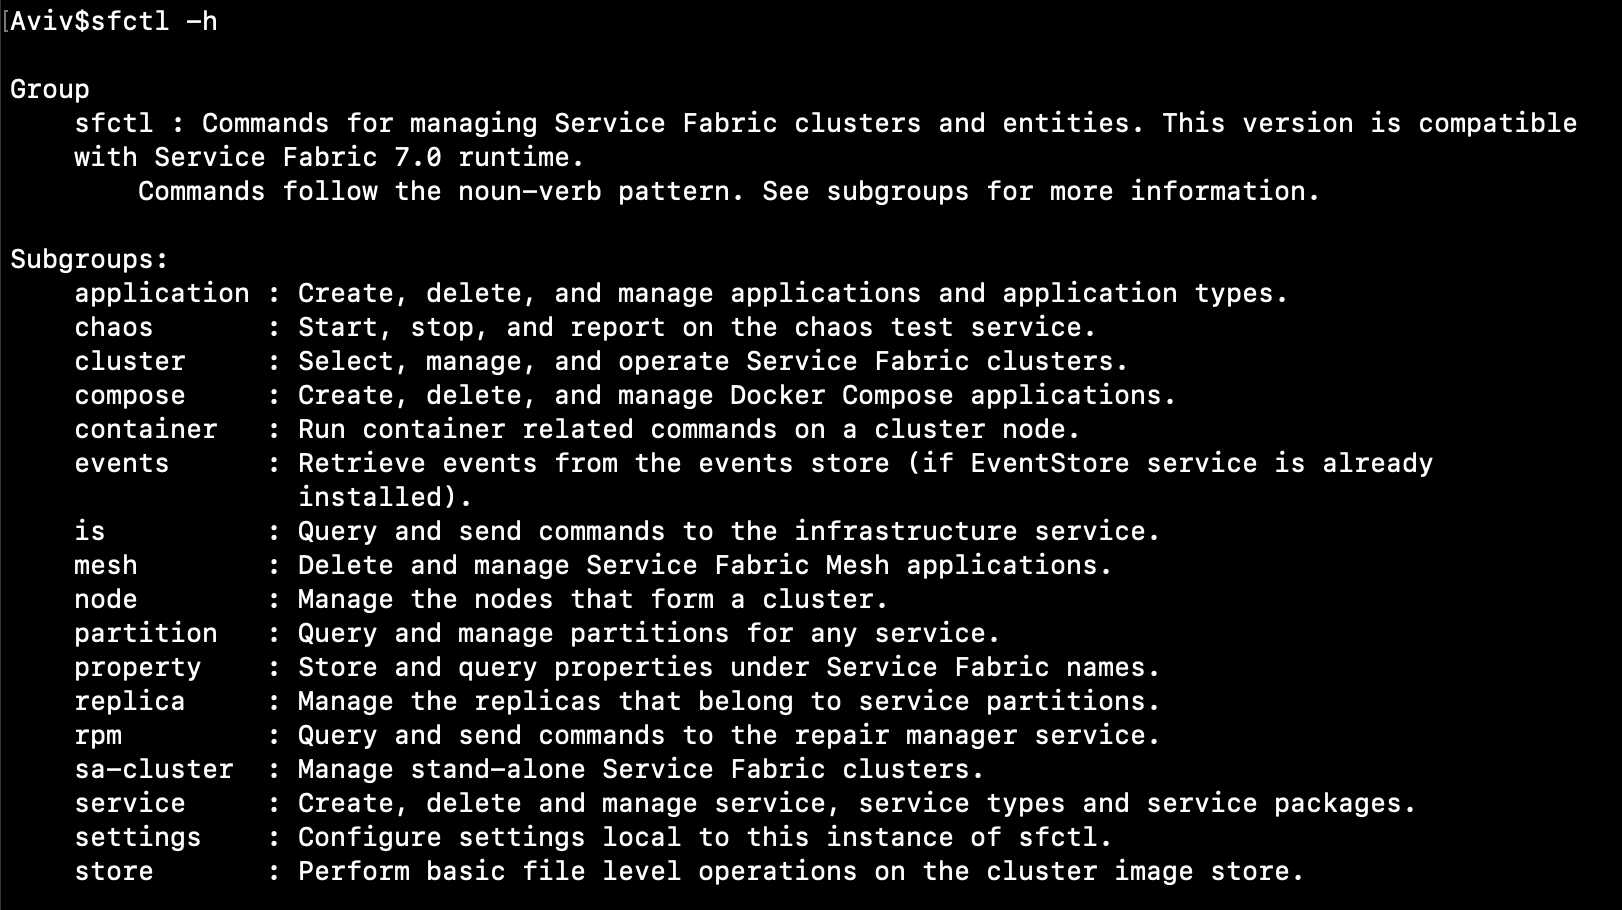 A list of Sfctl commands, "commands for managing ServiceFabric clusters and entities. This version is compatible with Service Fabric 7.0 runtime. Commands follow the noun-verb patters. Commands include subgroups such as application, chaos, cluster, etc. 